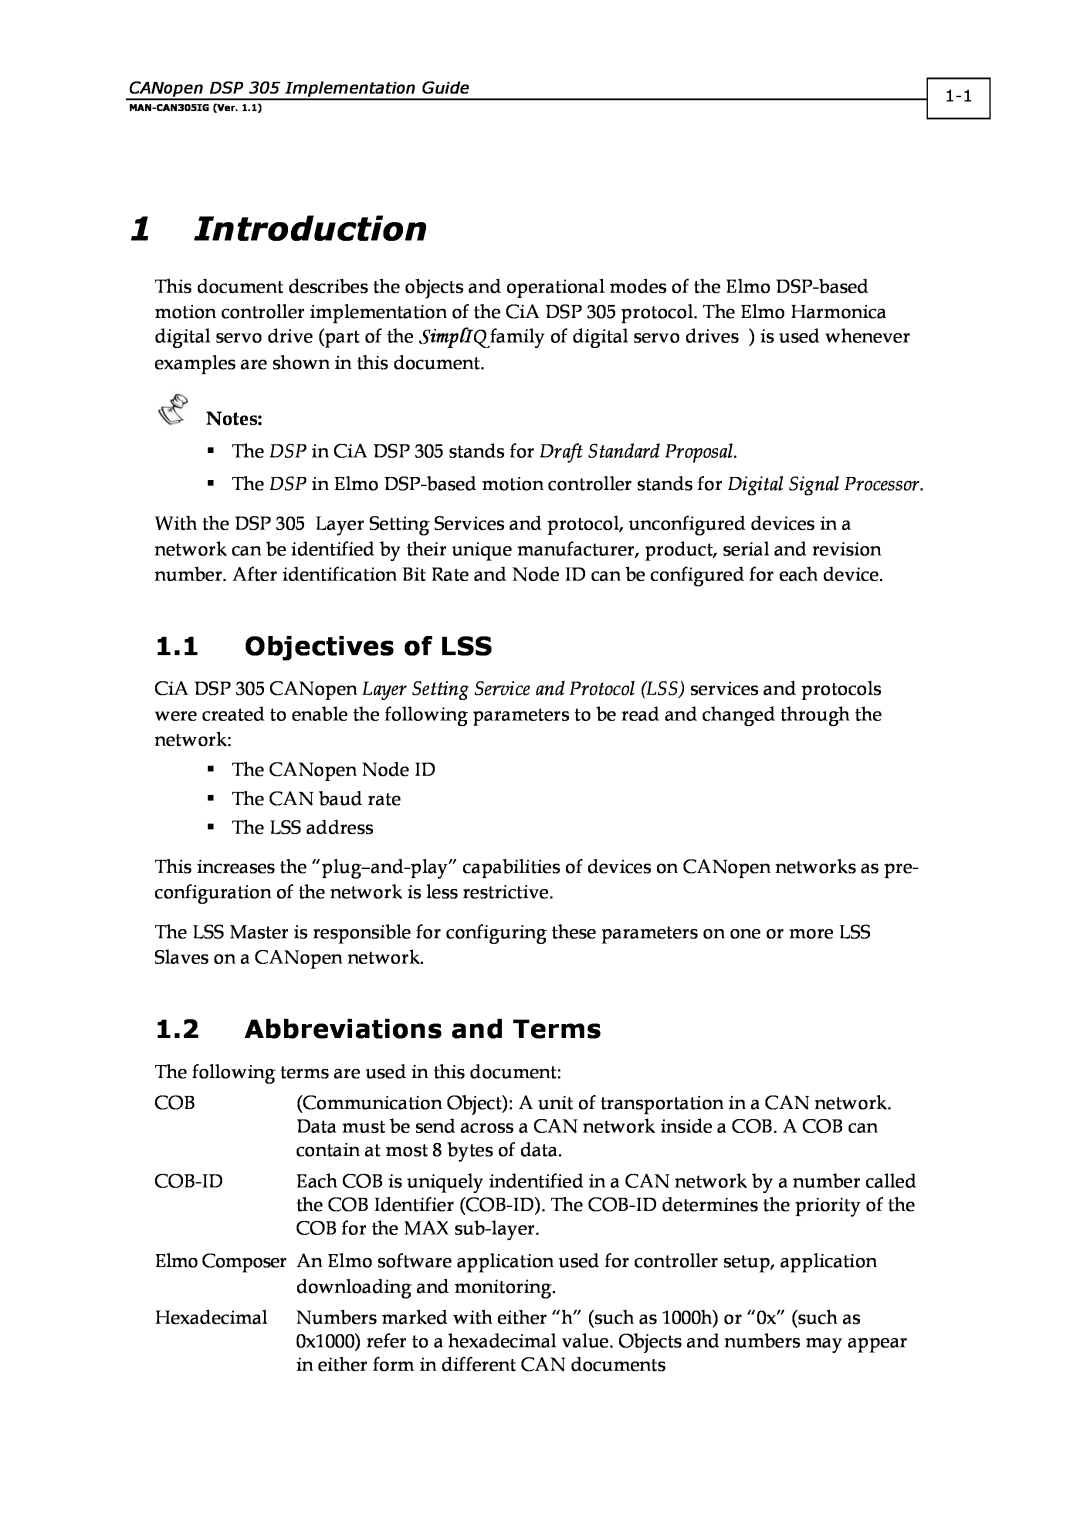 Elmo DSP 305 manual Introduction, 1.1Objectives of LSS, 1.2Abbreviations and Terms 